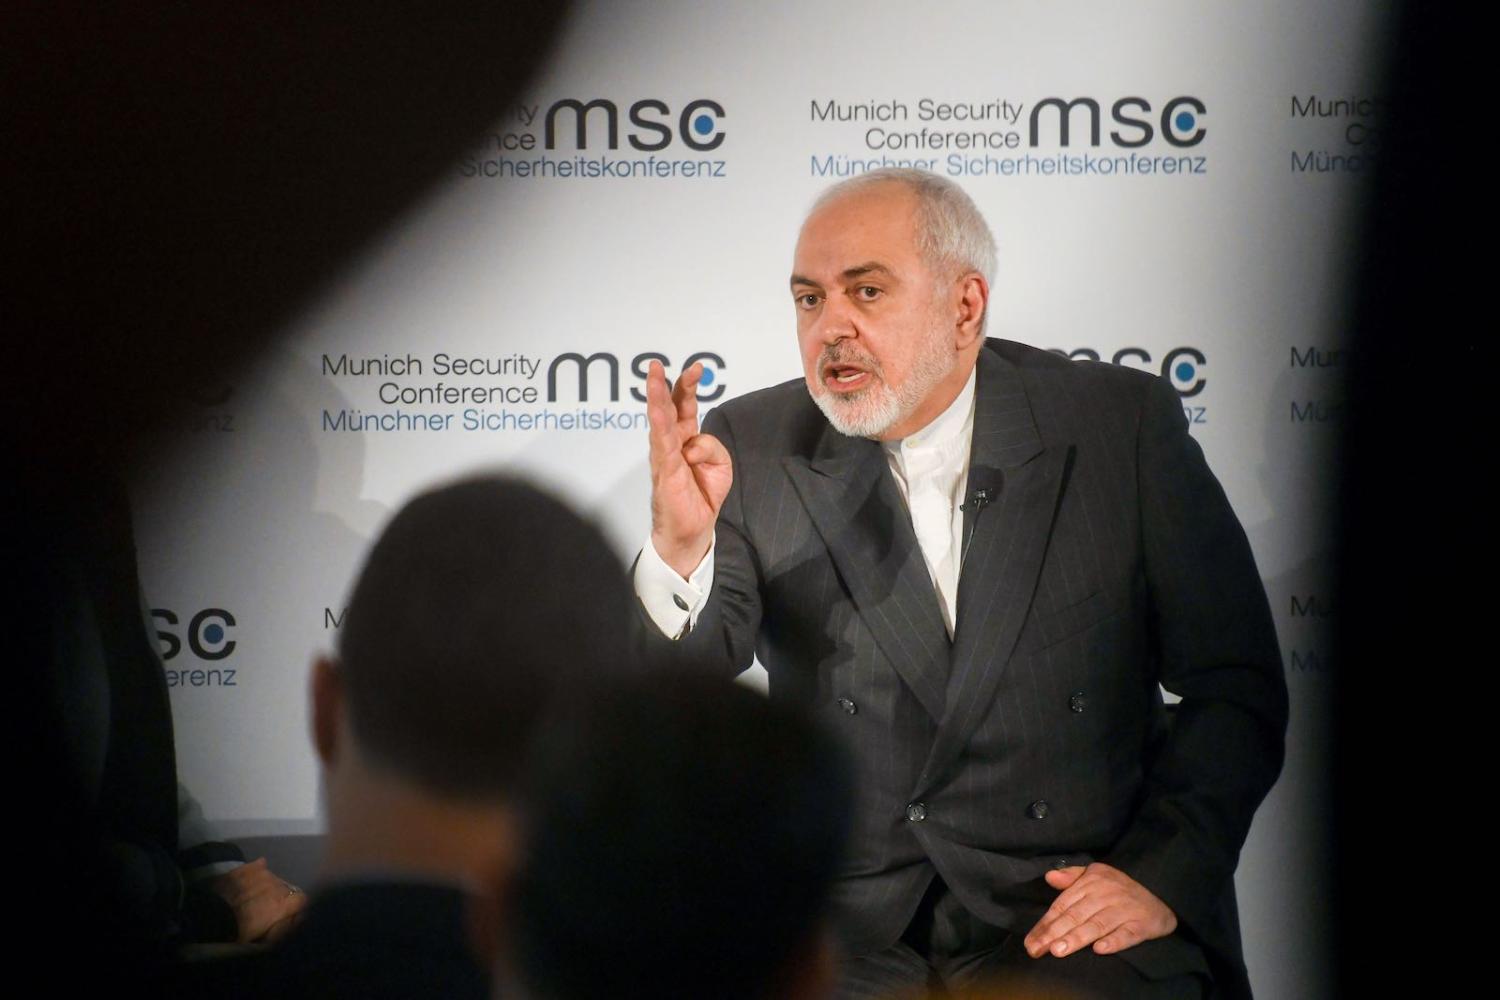 Iranian foreign minister Javad Zarif at the Munich Security Conference, 15 February (Tobias Hase/Picture Alliance via Getty Images)